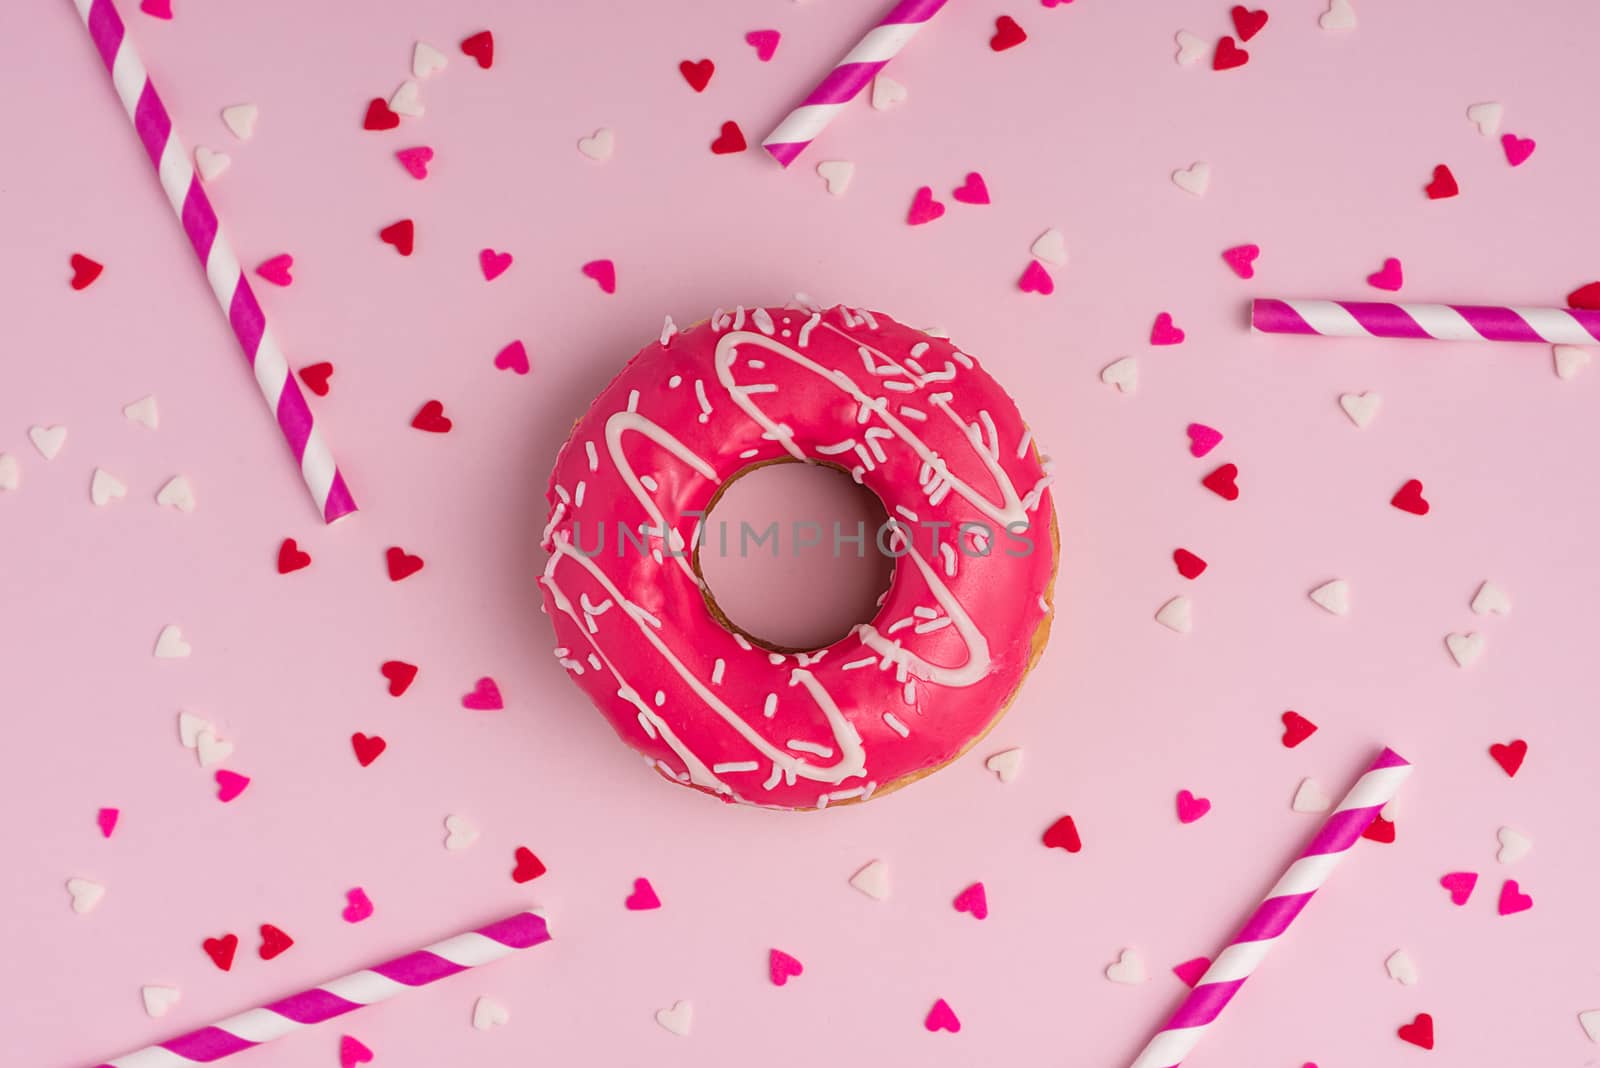 Donuts with icing on pastel pink background with copyspace. Swee by makidotvn